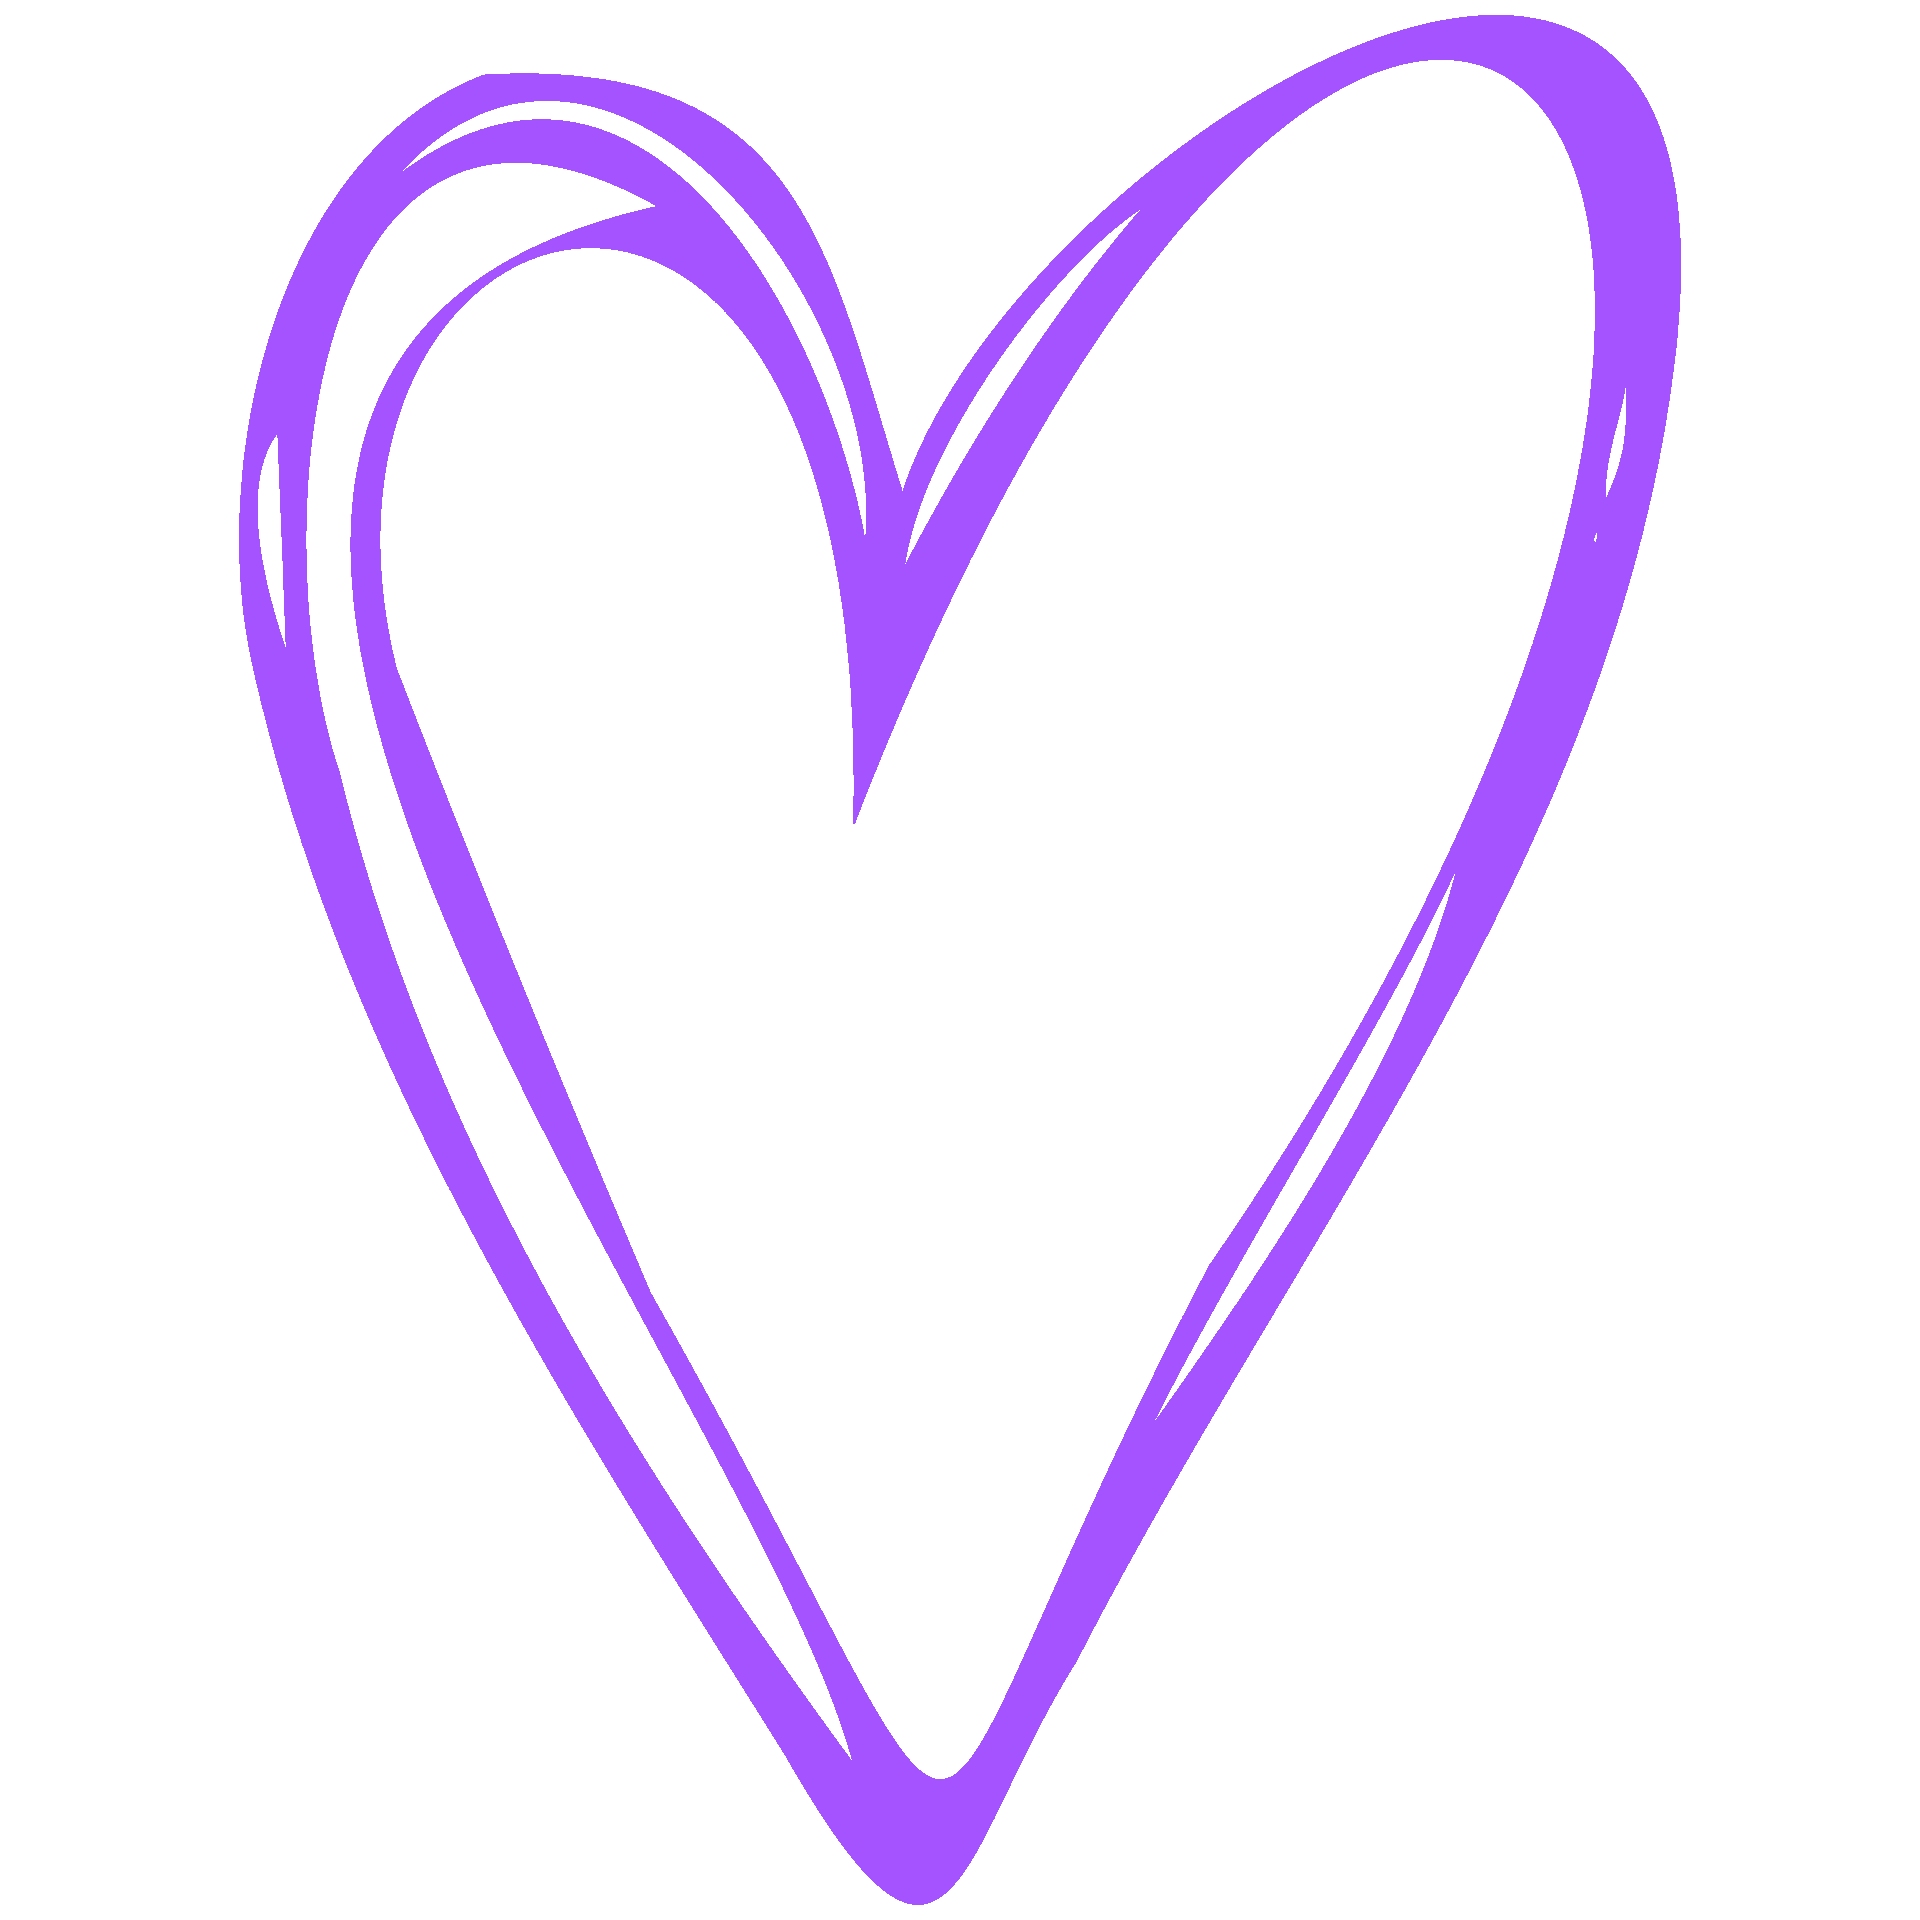 simple-doodle-hand-drawn-heart-isolated-design-element-for-valentine-s-day-transparent-clipart-free-png